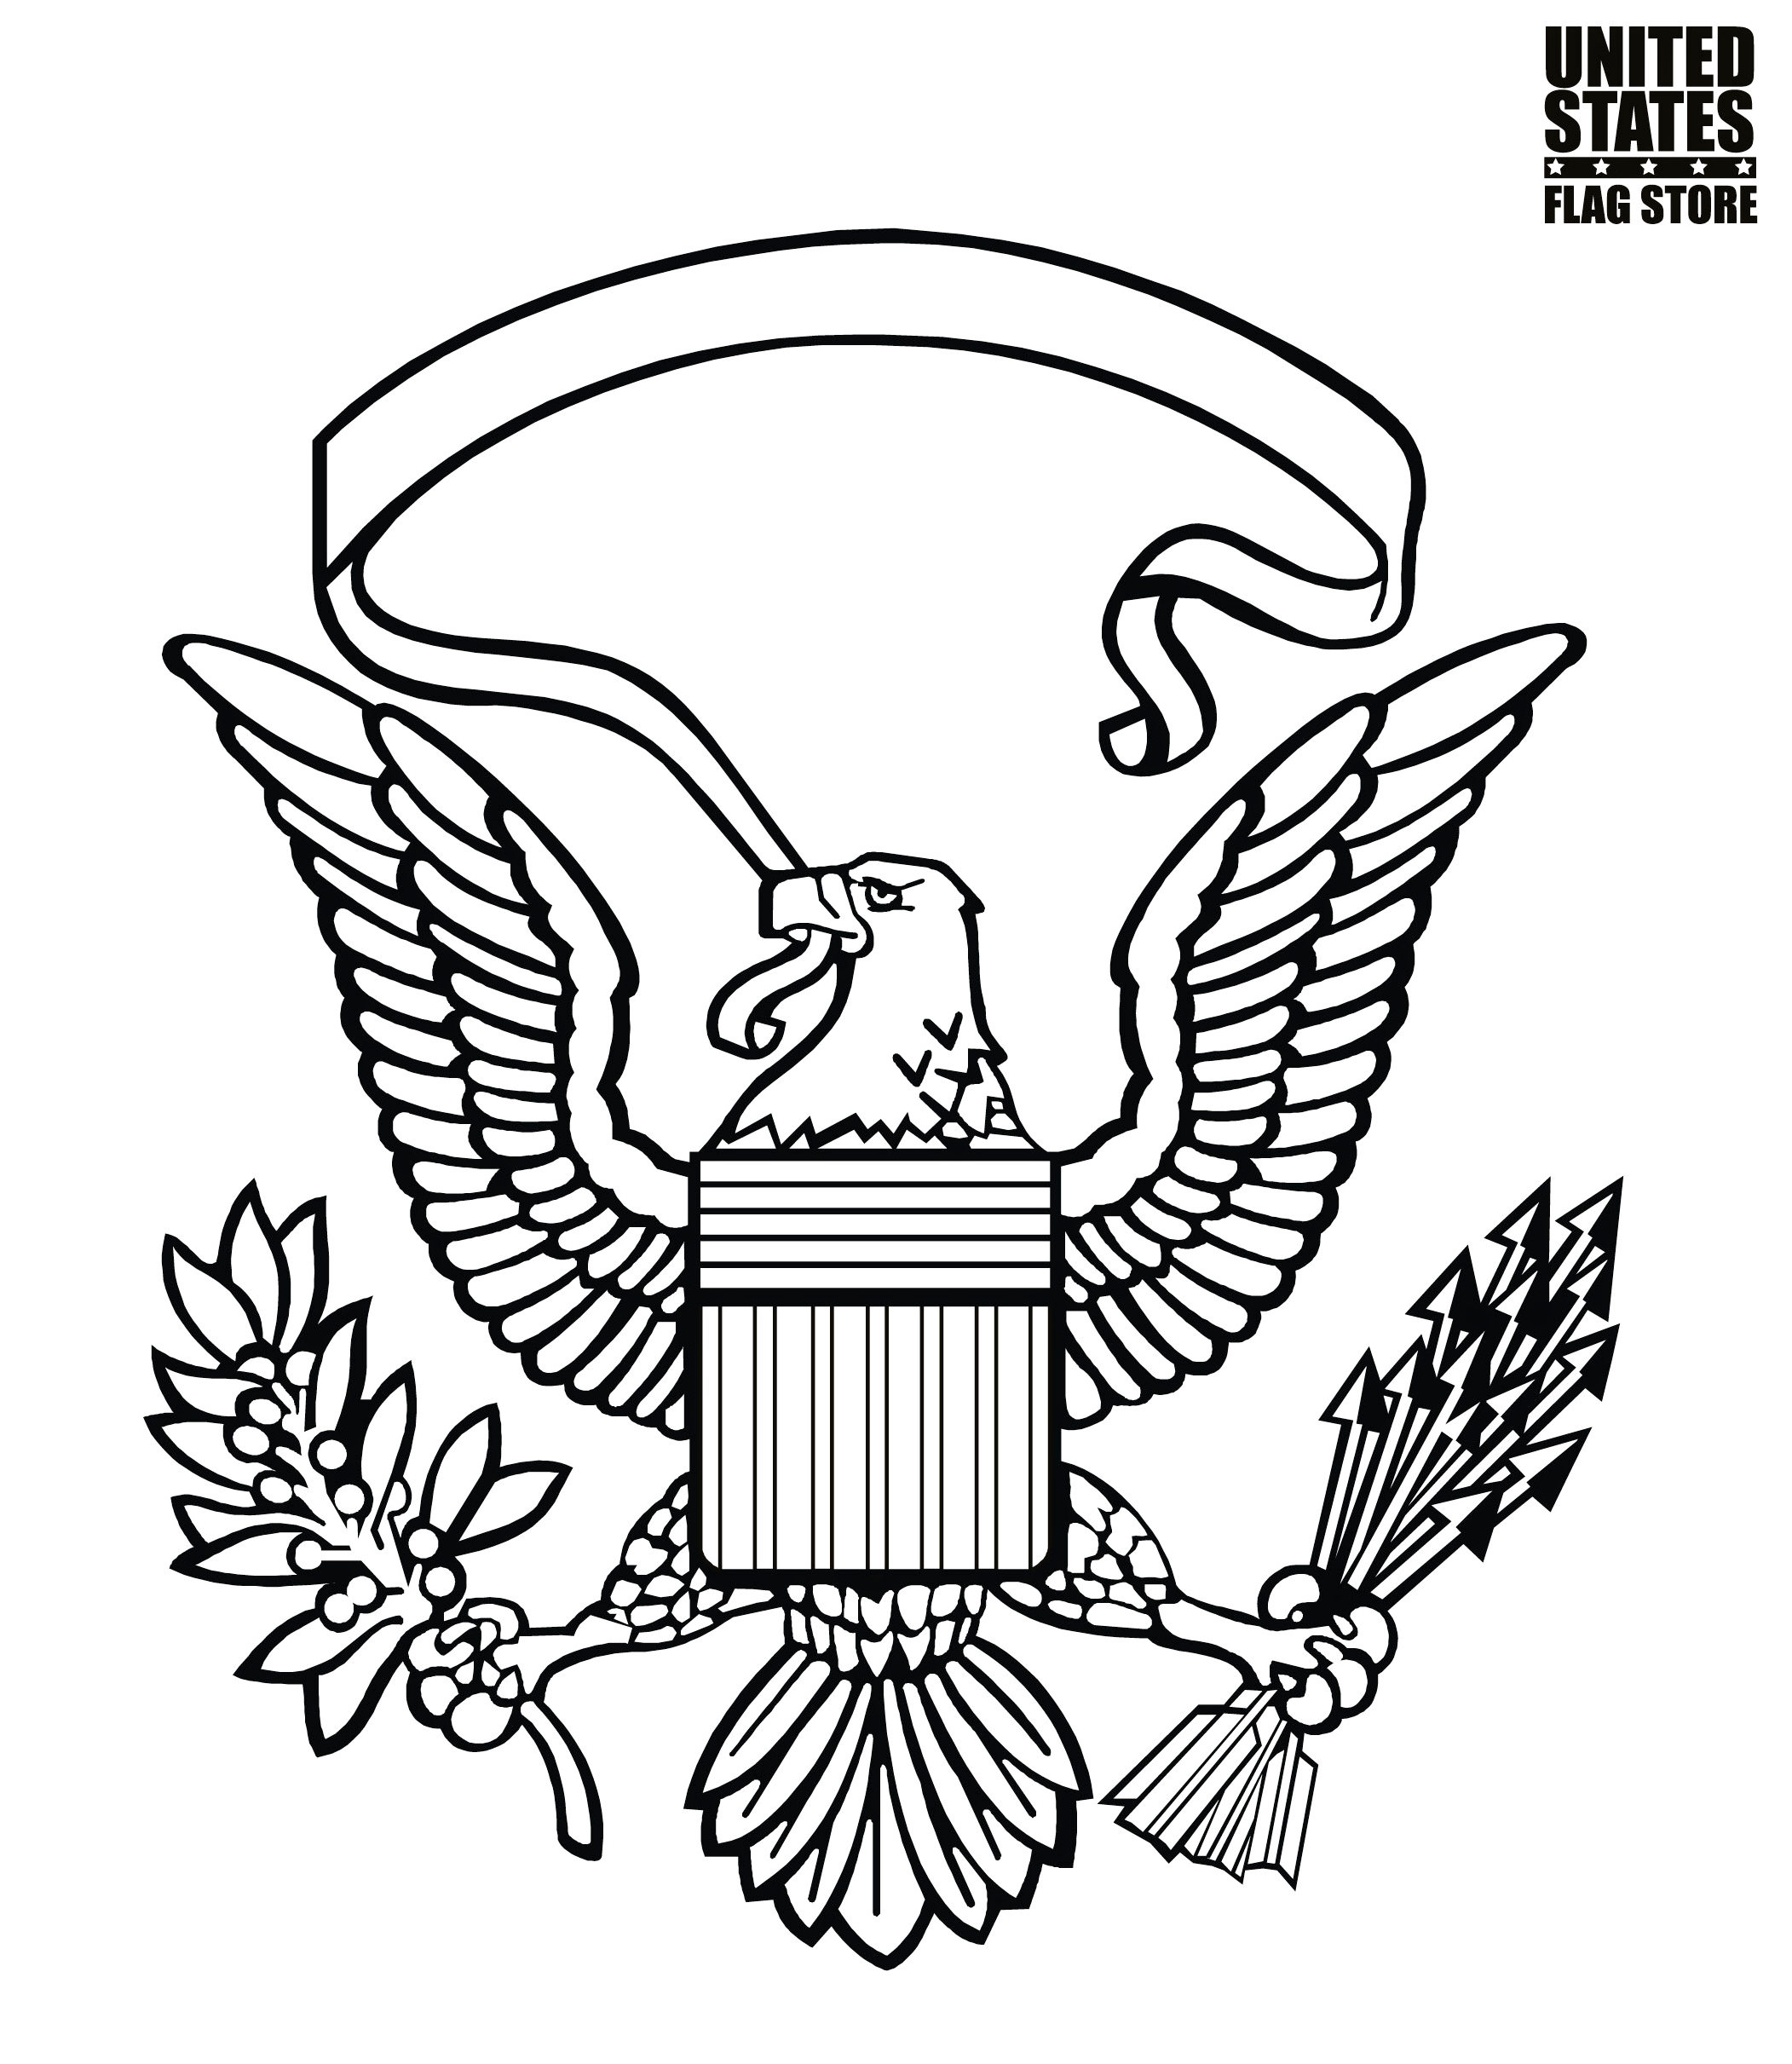 us-symbol-coloring-pages